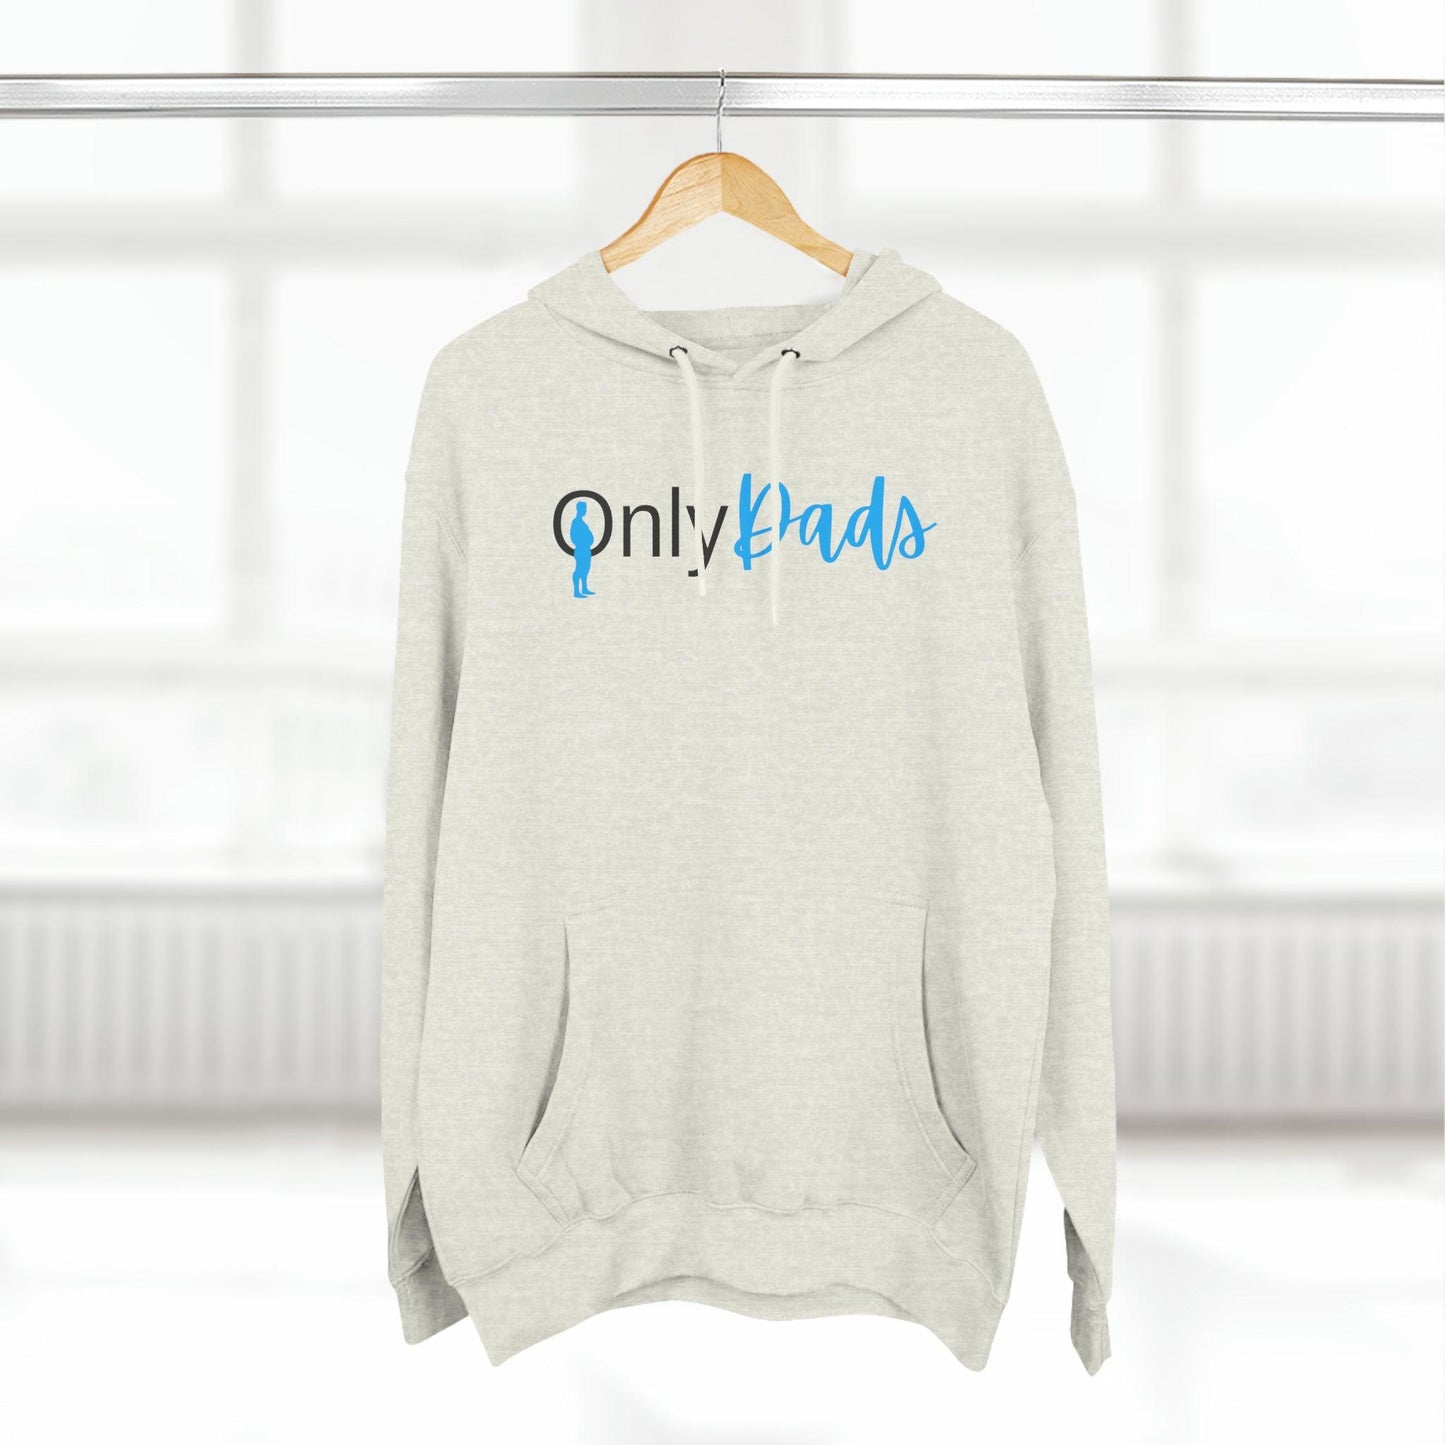 Only Dads - Hoodie - Wicked Naughty Apparel